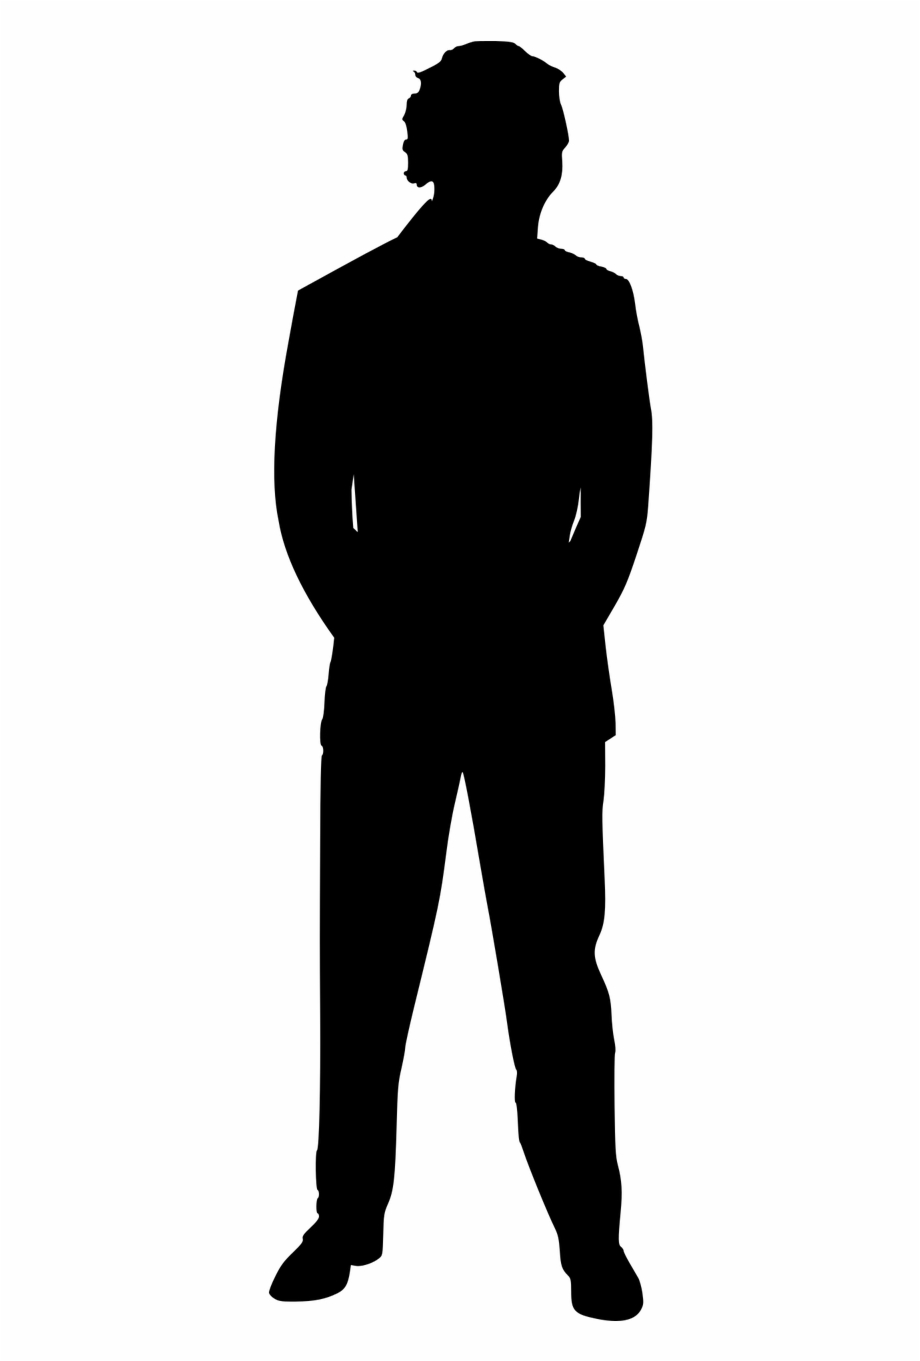 Silhouette Business Man Looking